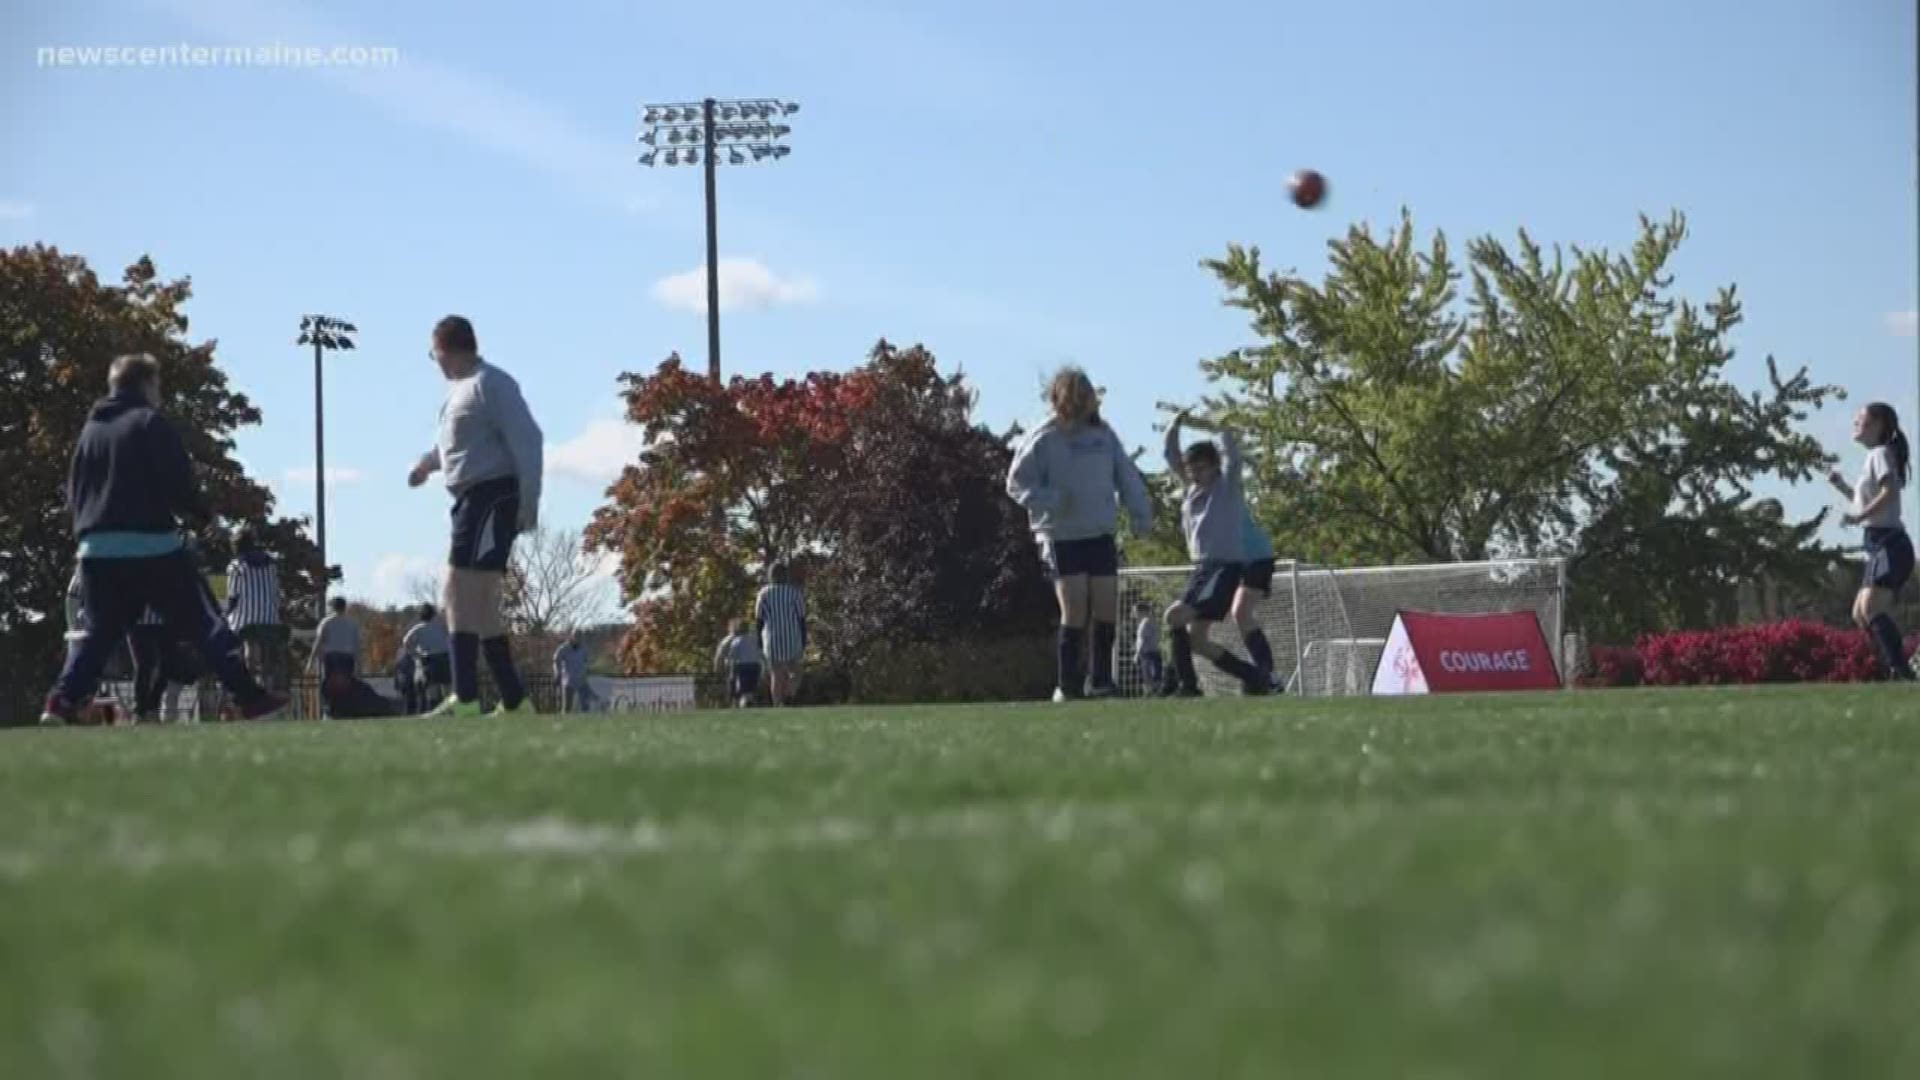 Special Olympics soccer tournament gives athletes an opportunity to grow through sport.